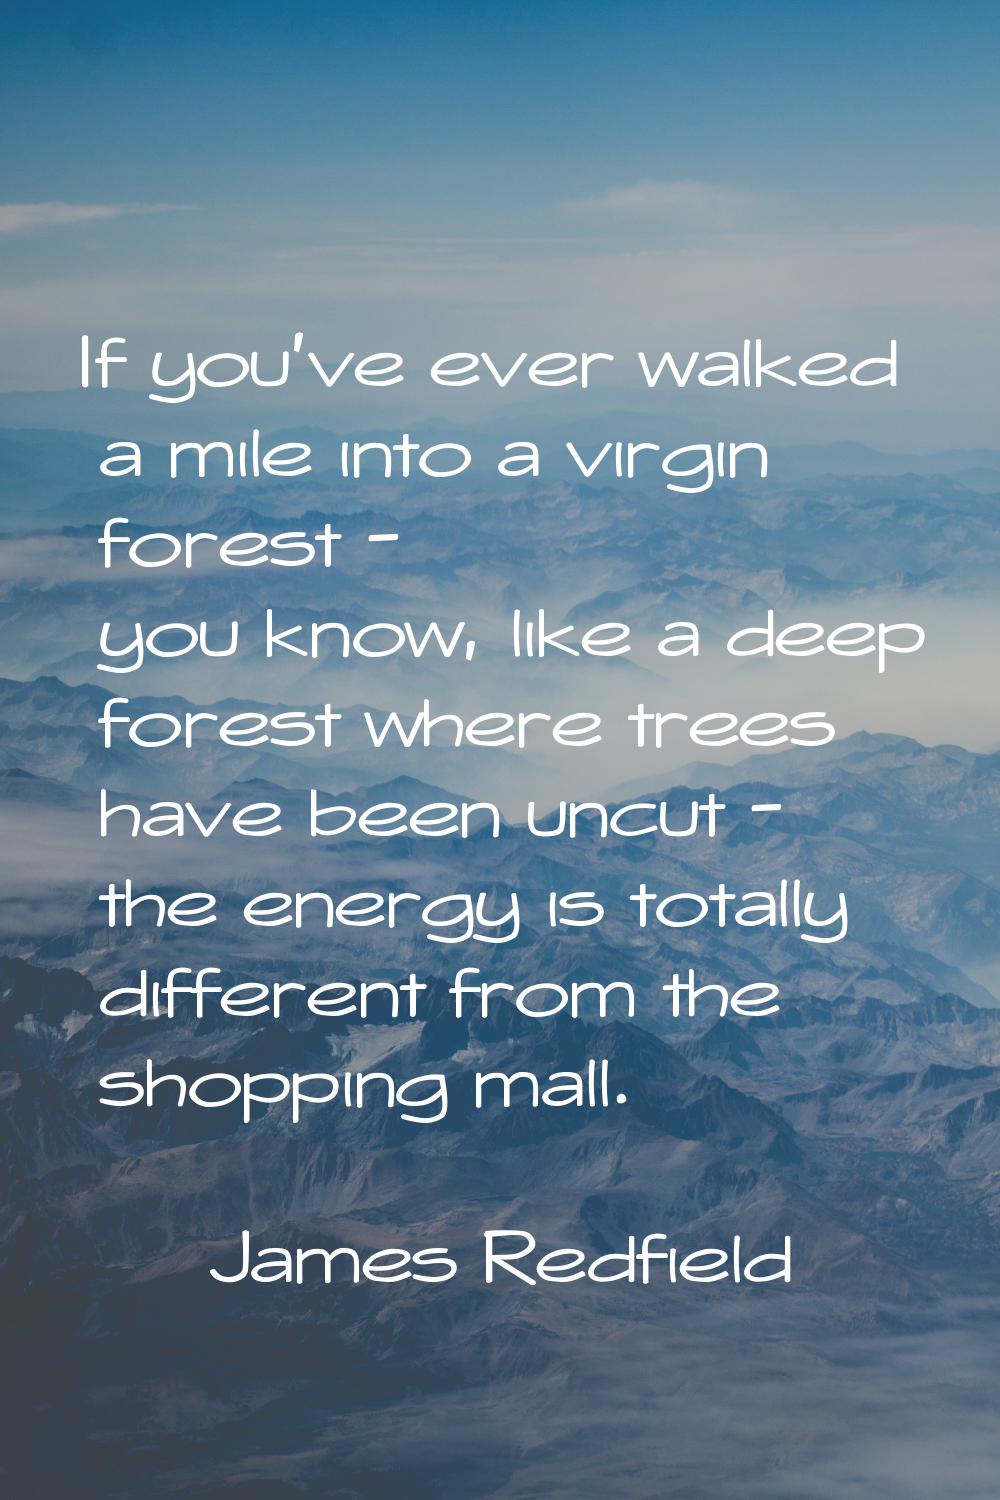 If you've ever walked a mile into a virgin forest - you know, like a deep forest where trees have b